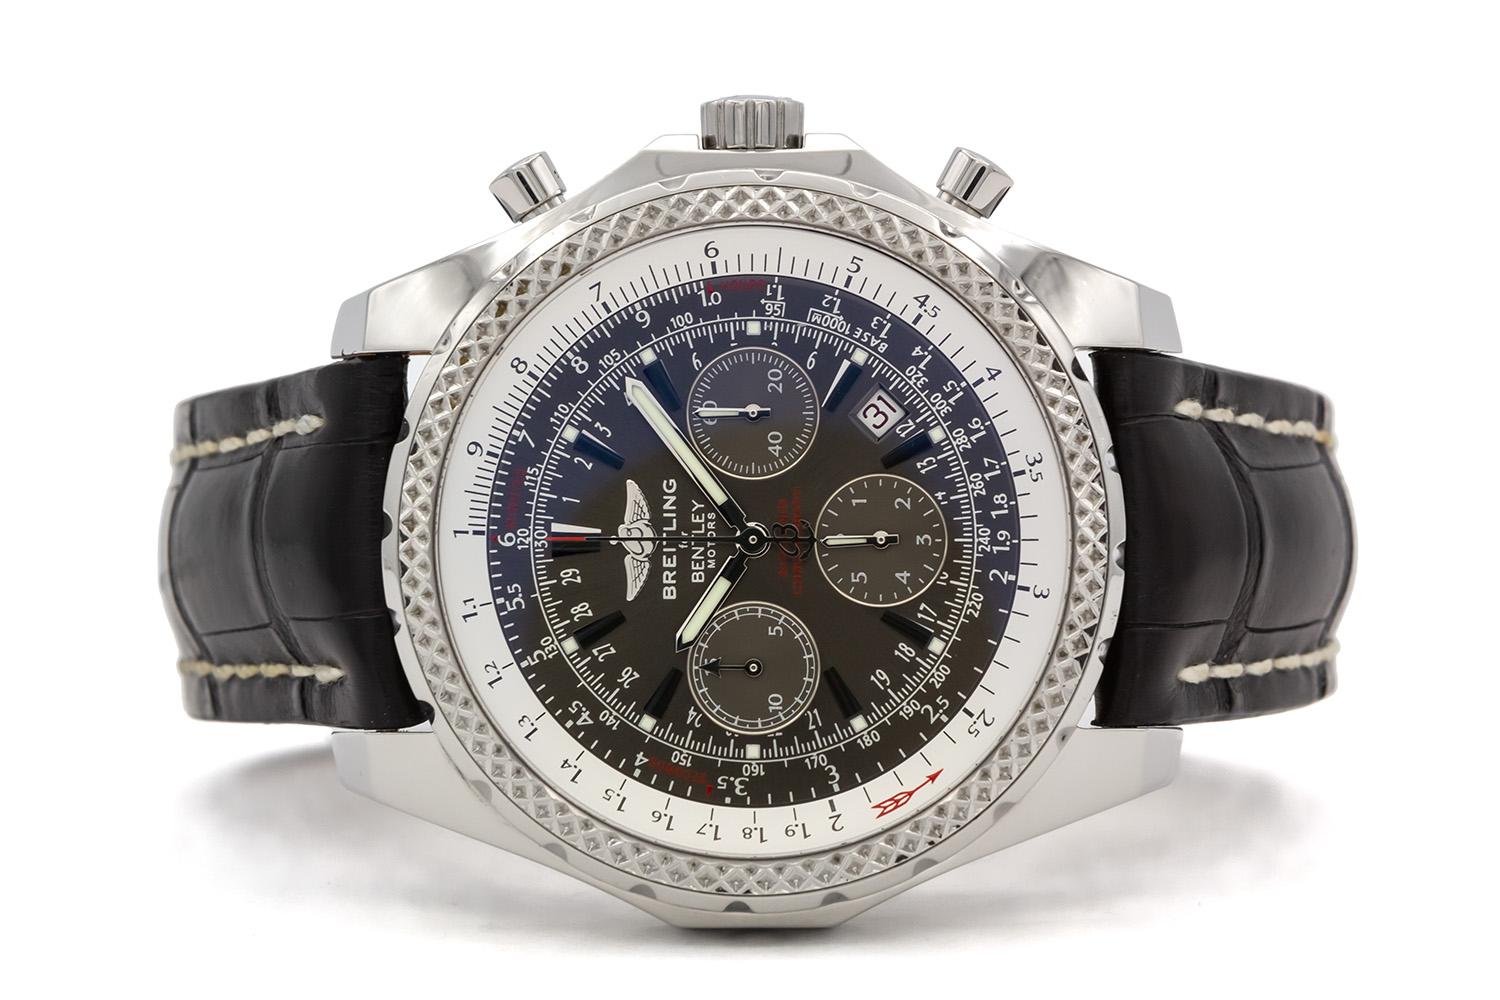 We are pleased to offer this Breitling Bentley Motors Special Edition Stainless Steel Chronograph A25362. This watch features a 48mm stainless steel case, dark gray chronograph dial with white inner bezel and dark gray sub dials, Breitling factory